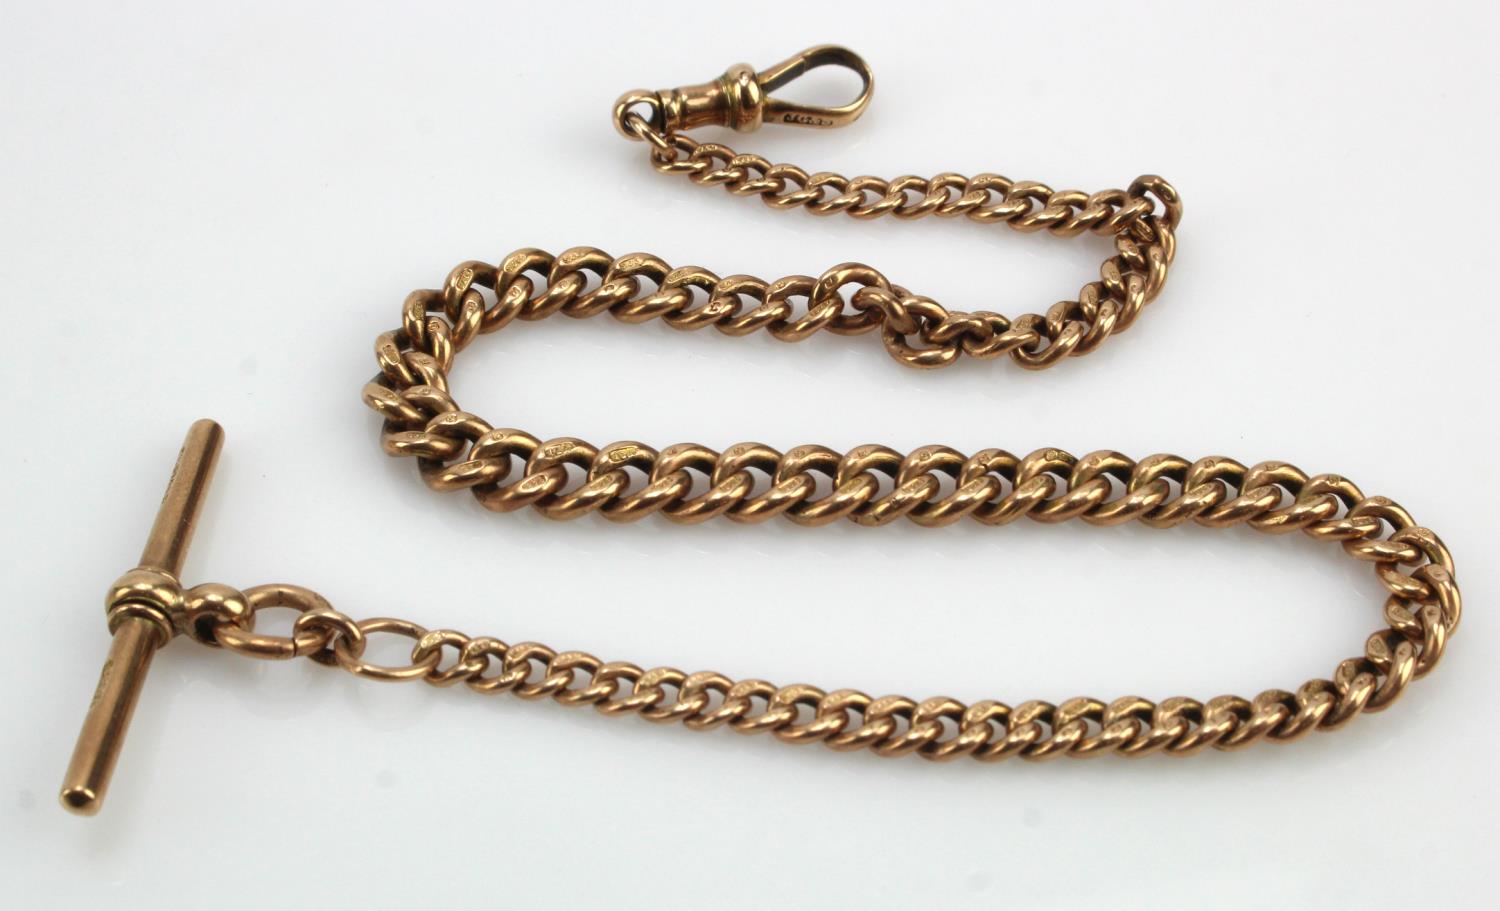 9ct "T" bar pocket watch chain. Length approx 30cm, weight 23.3g